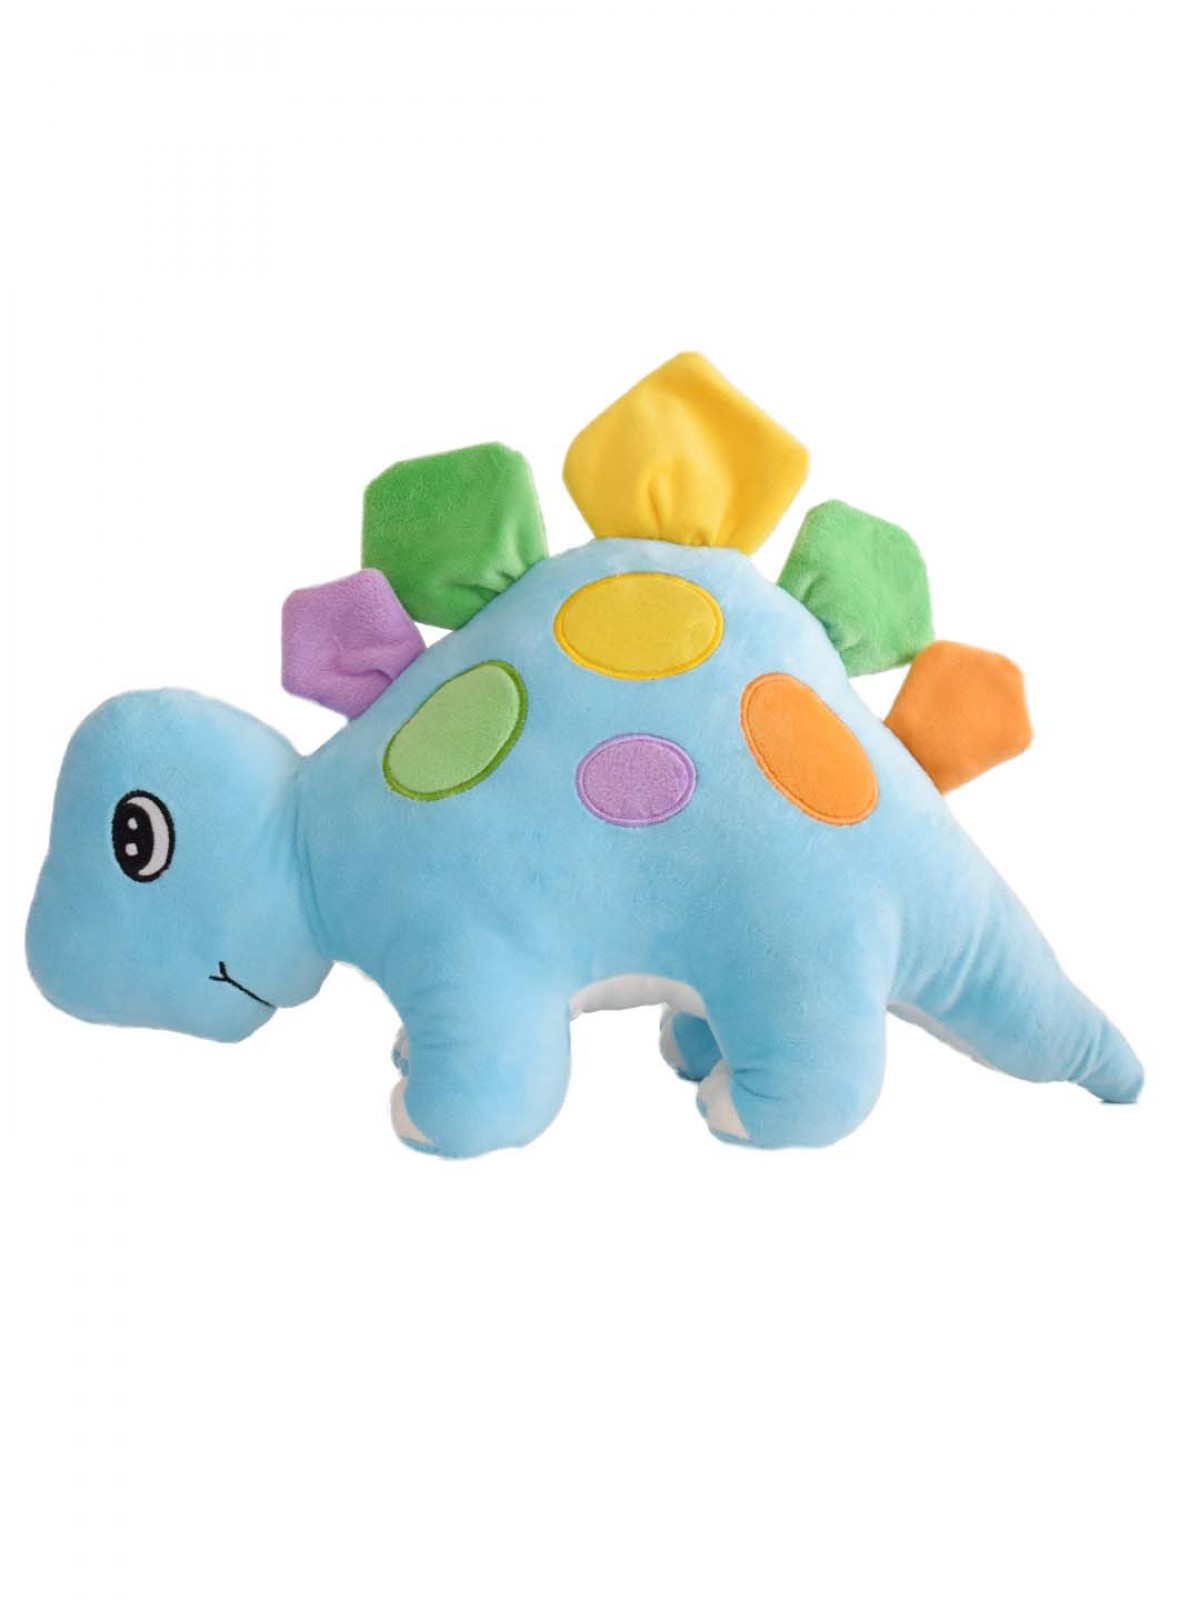 Adorable Stuffed Plush Dinosaur By Mirada, Soft Toys For Kids Of All Ages, 3Y+, Blue, 50Cm